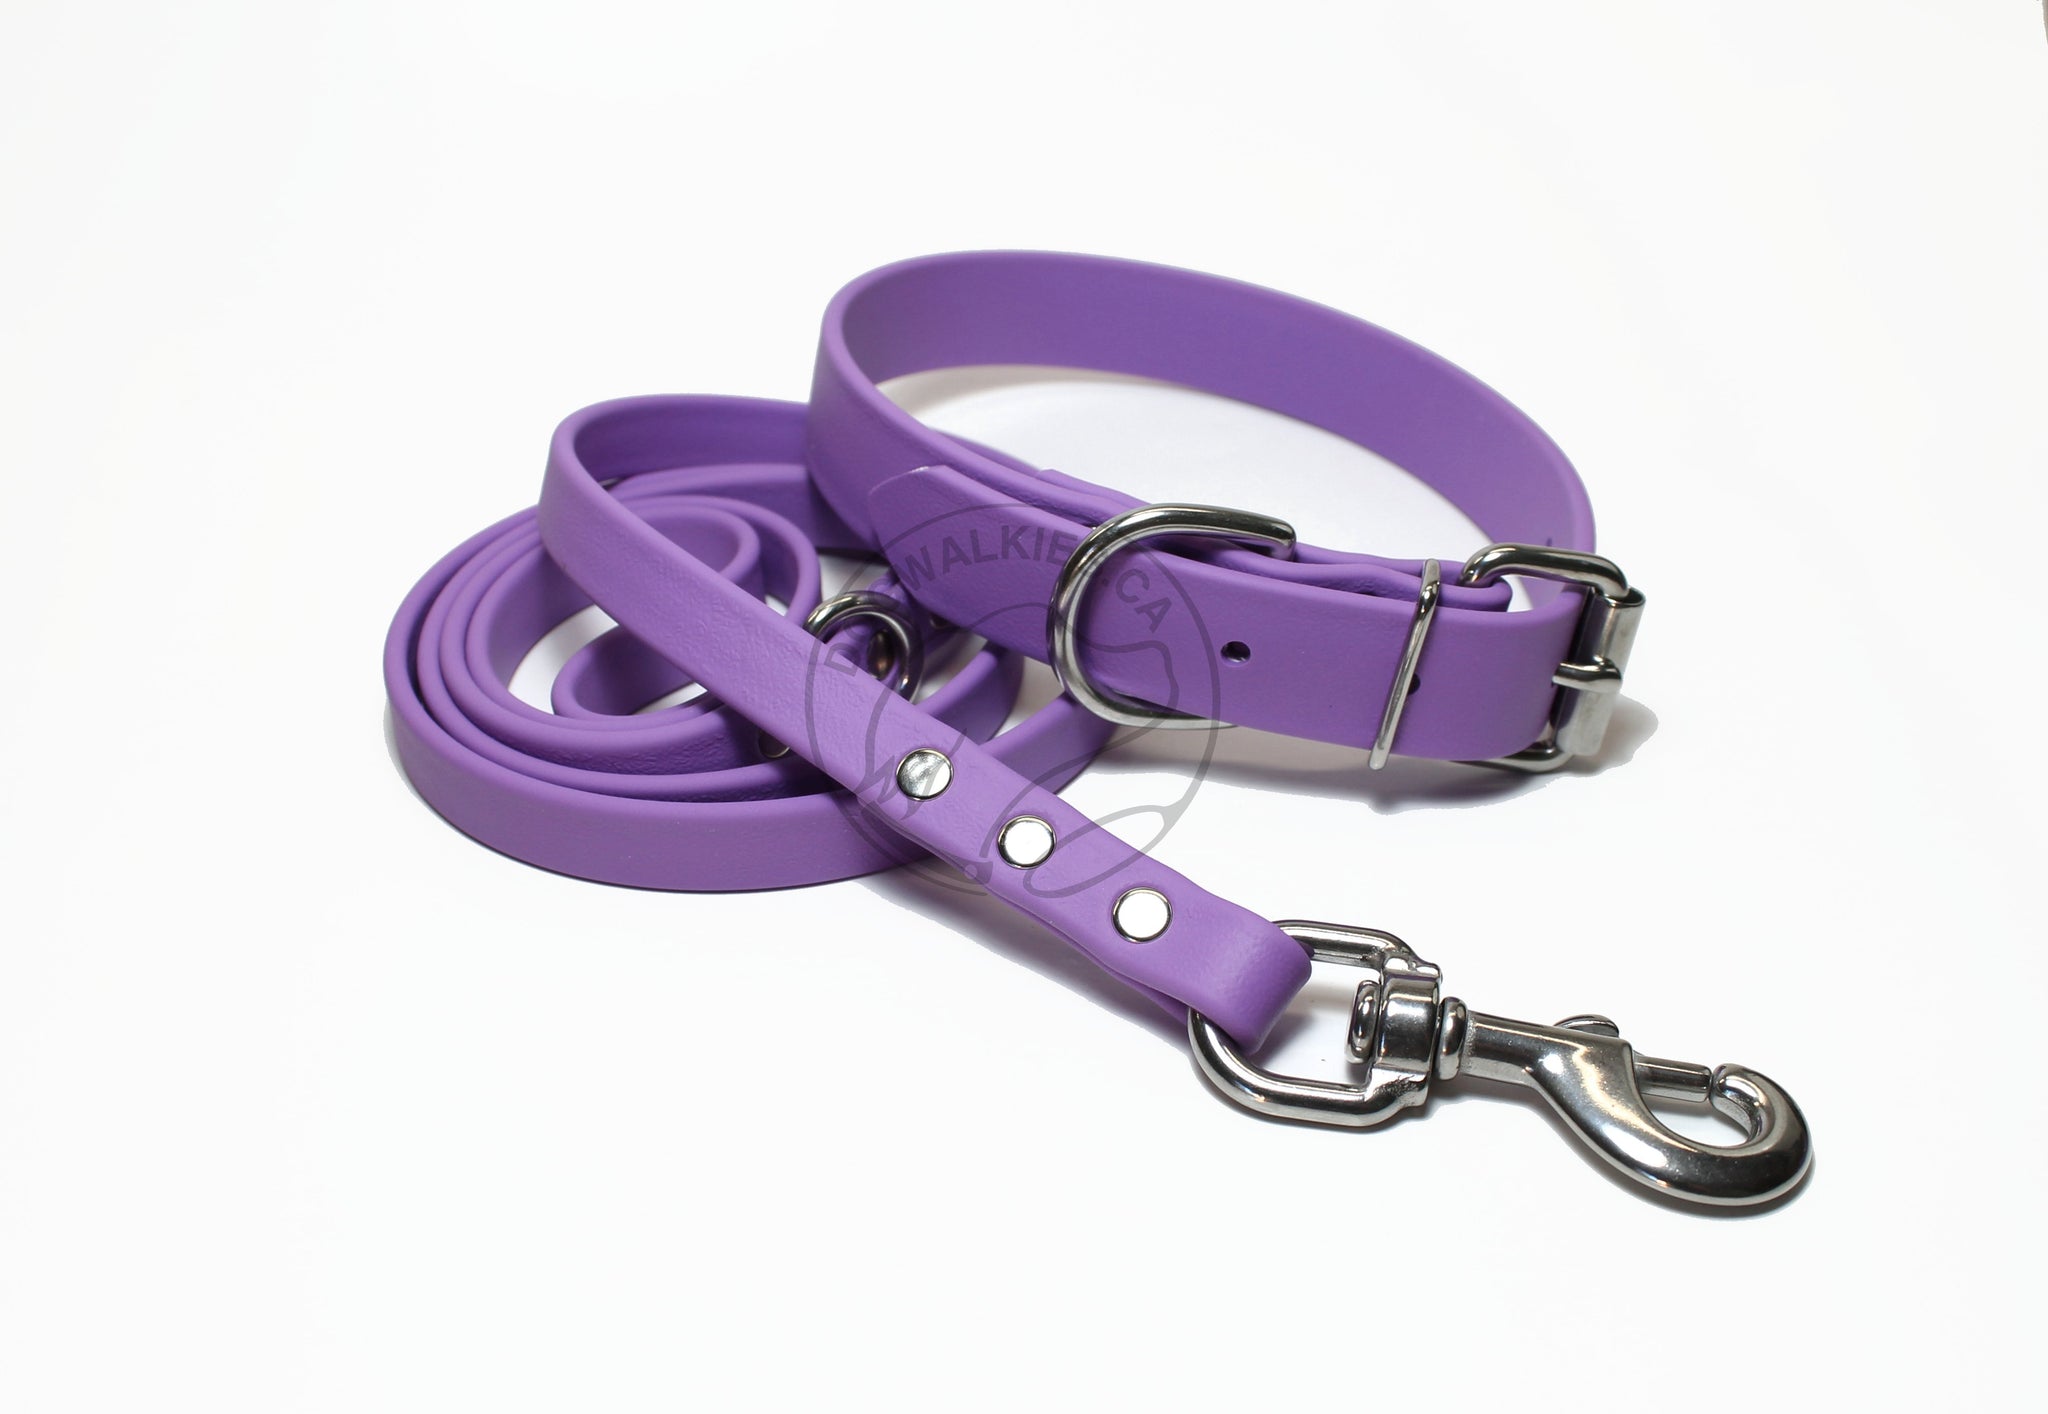 Amethyst purple dog leash and collar set. Made from durable Biothane coated webbing. Features stainless steel hardware. Custom length / size, handmade and waterproof. Vegan-friendly.